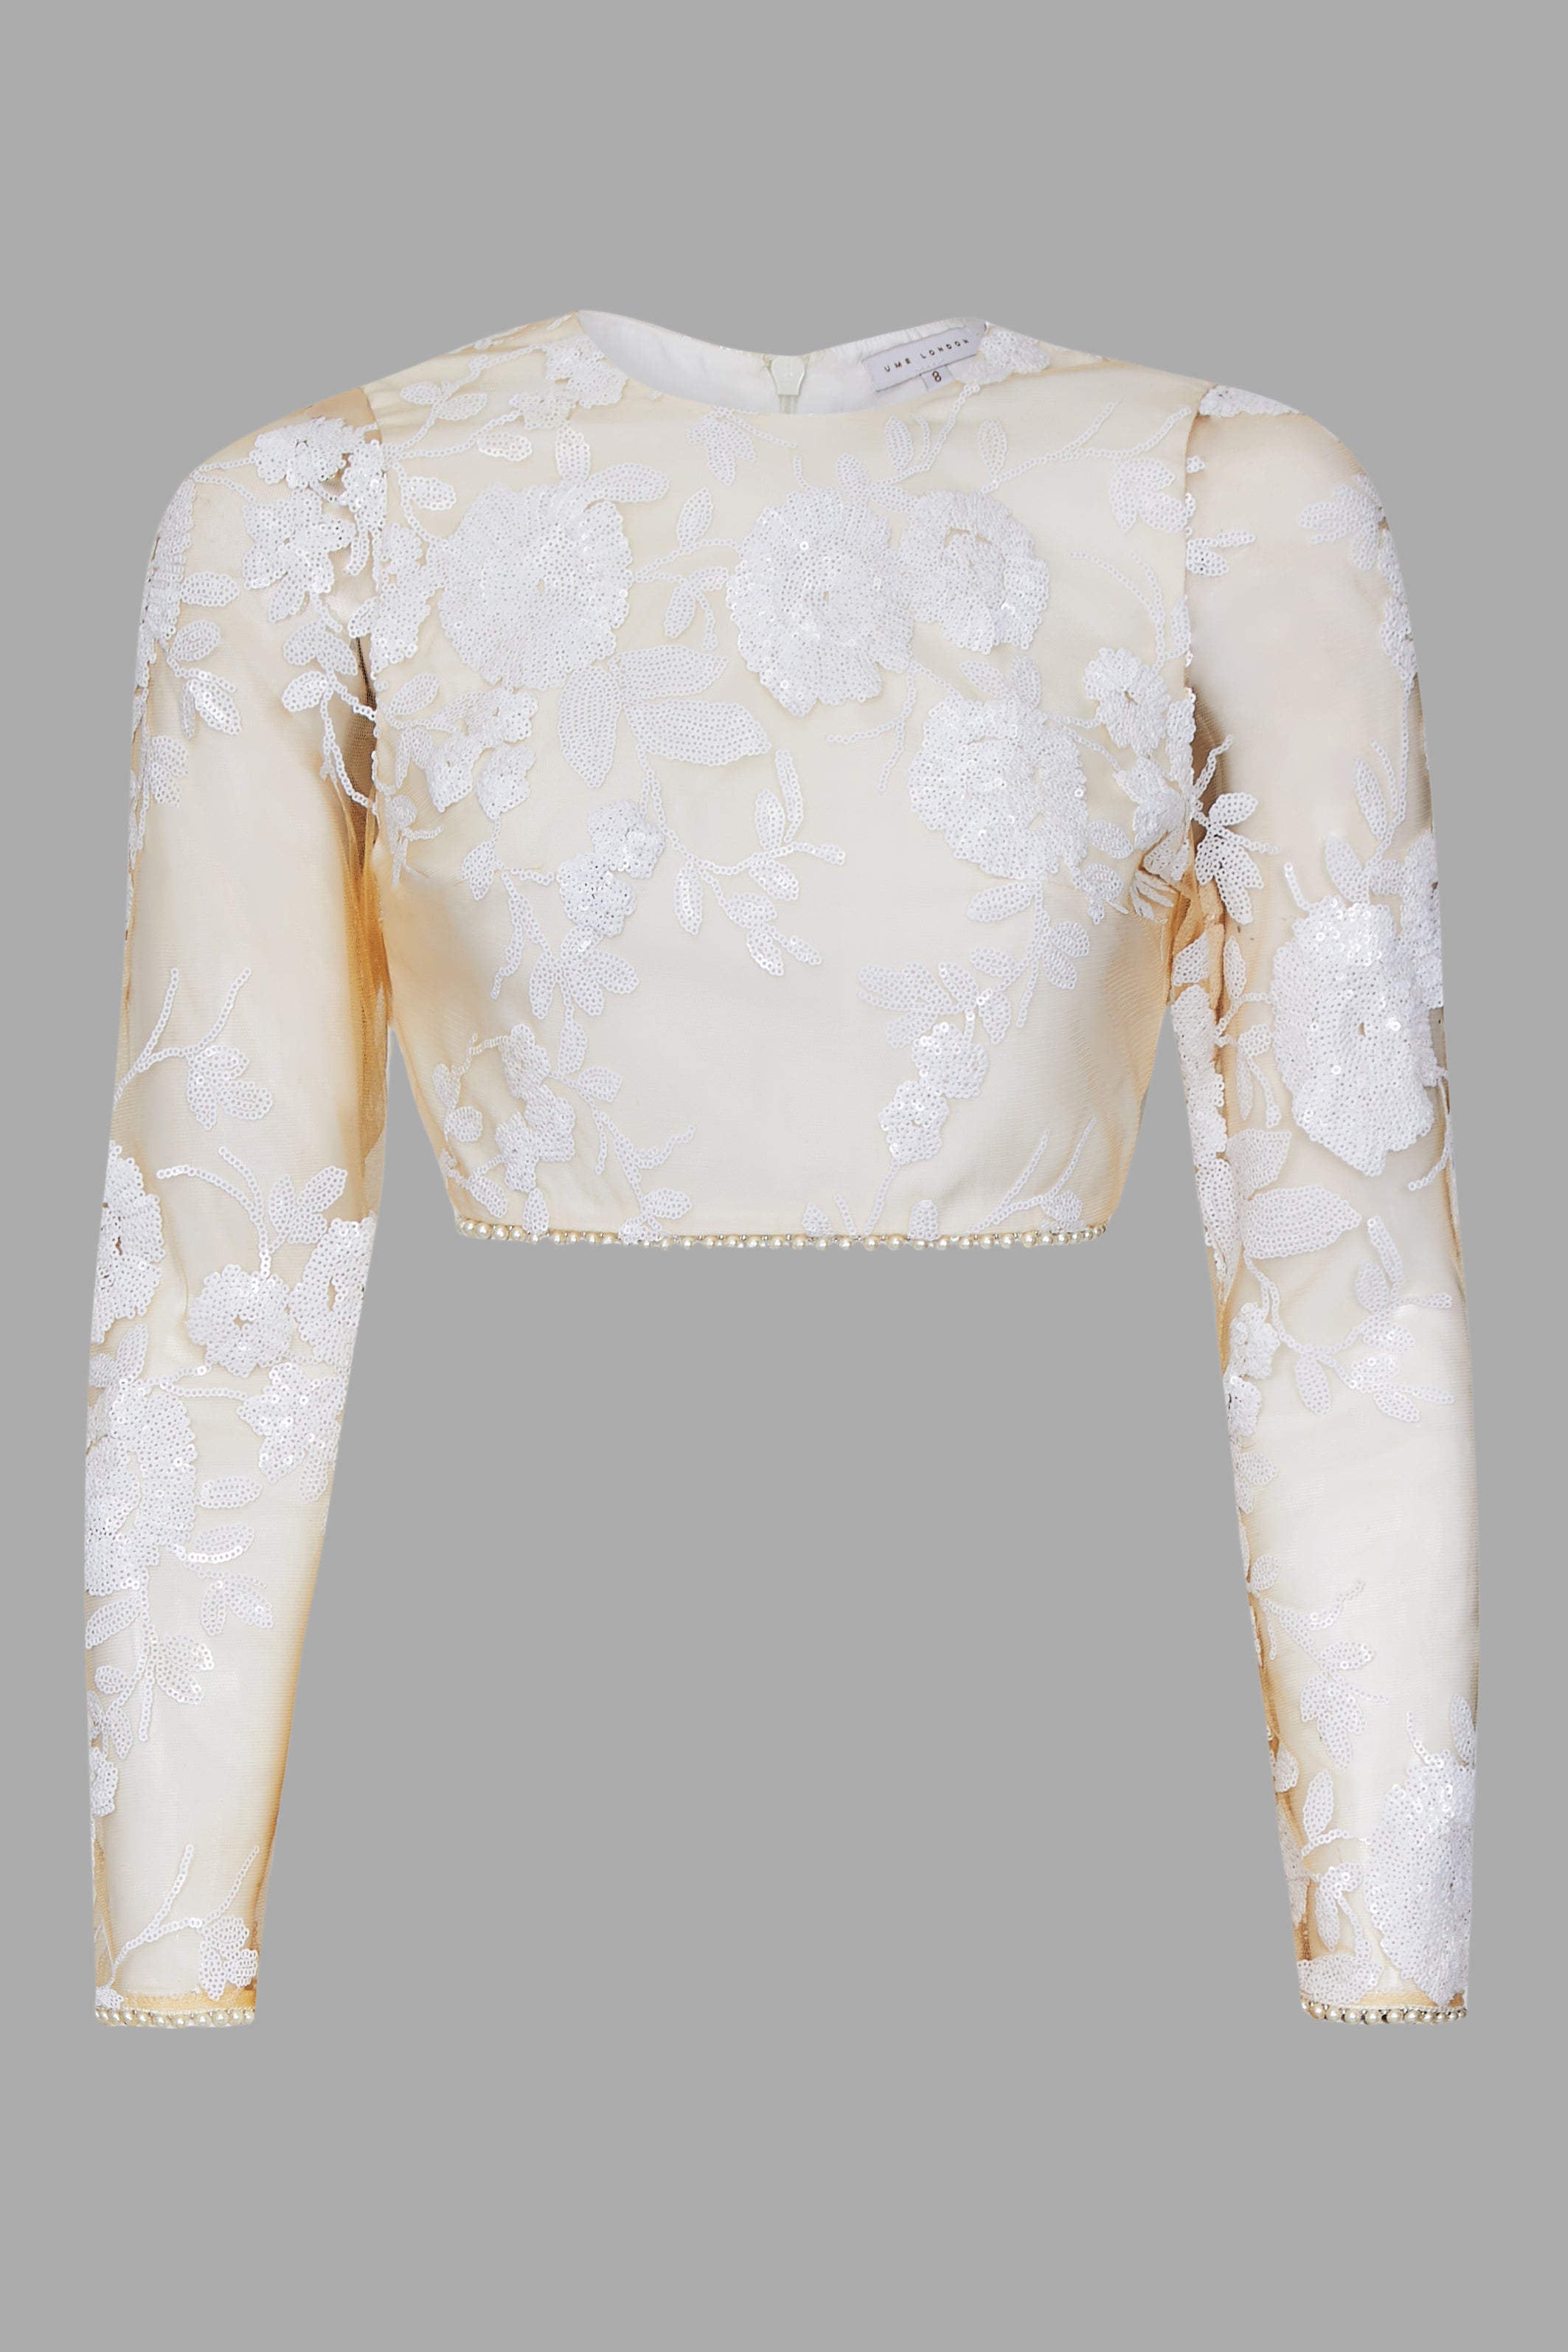 Signature White Rose Sequin Embellished Full Sleeve Top Pearl Back Zip Evening Outfit UME London Destination Weddings UK